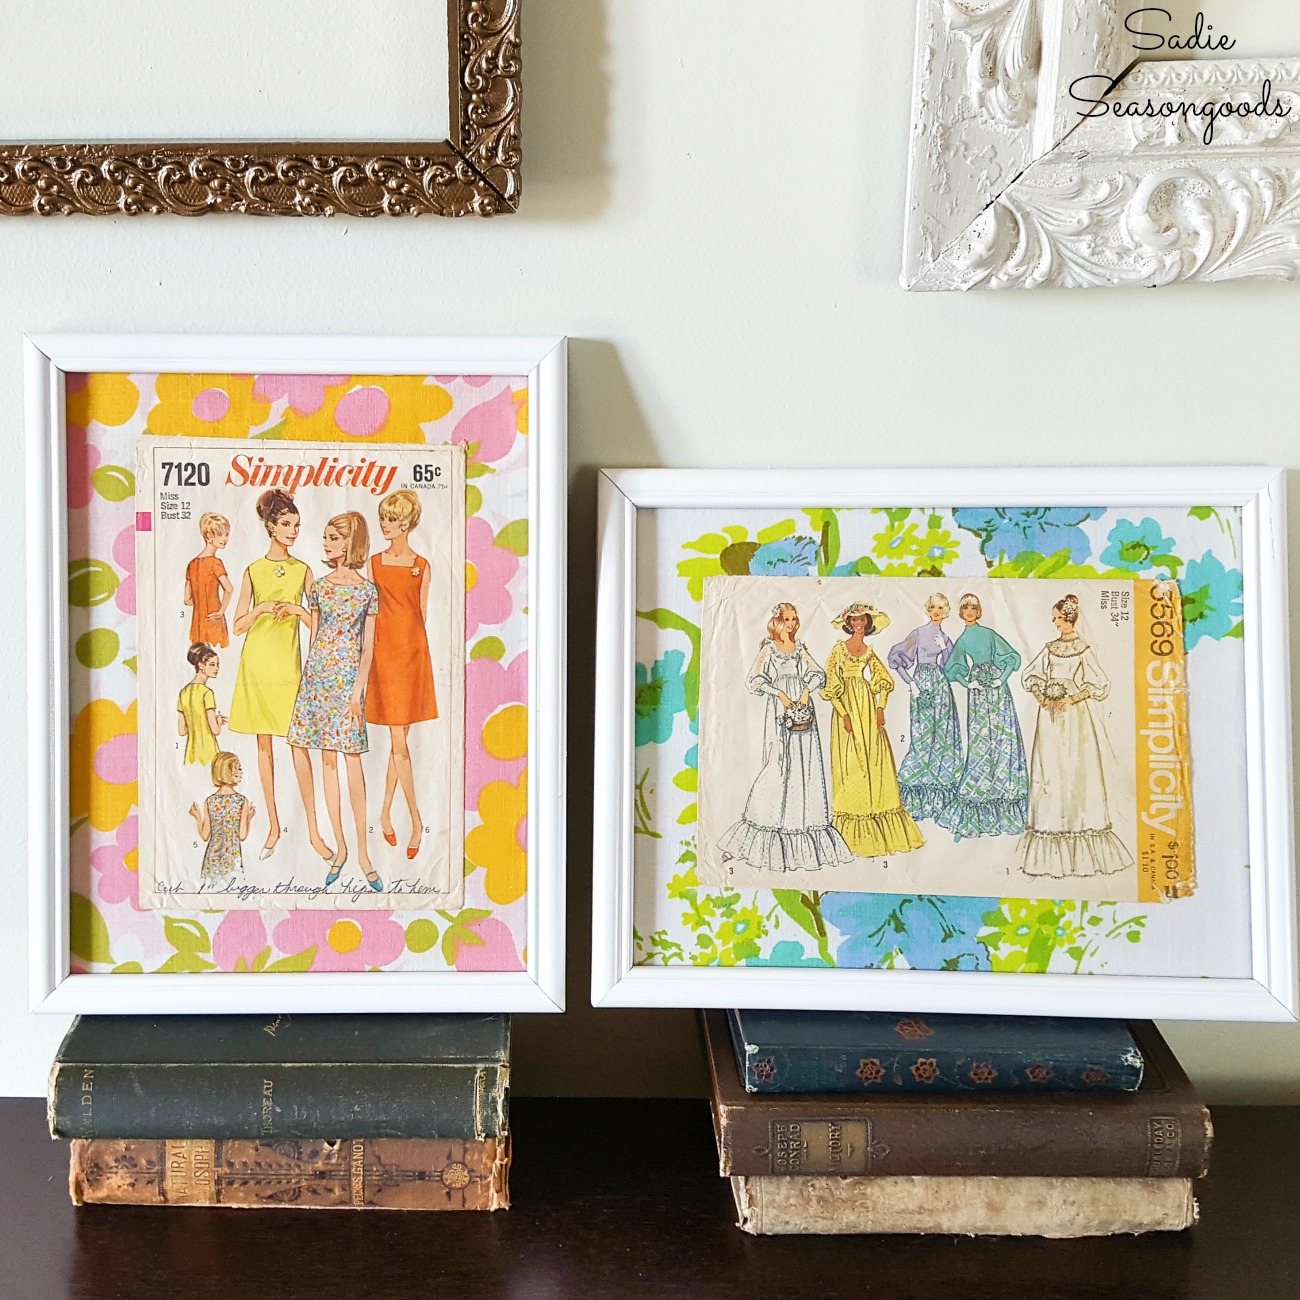 How to Use Mod Podge Like a Pro (6 Great Tips!) - Positively Splendid  {Crafts, Sewing, Recipes and Home Decor}